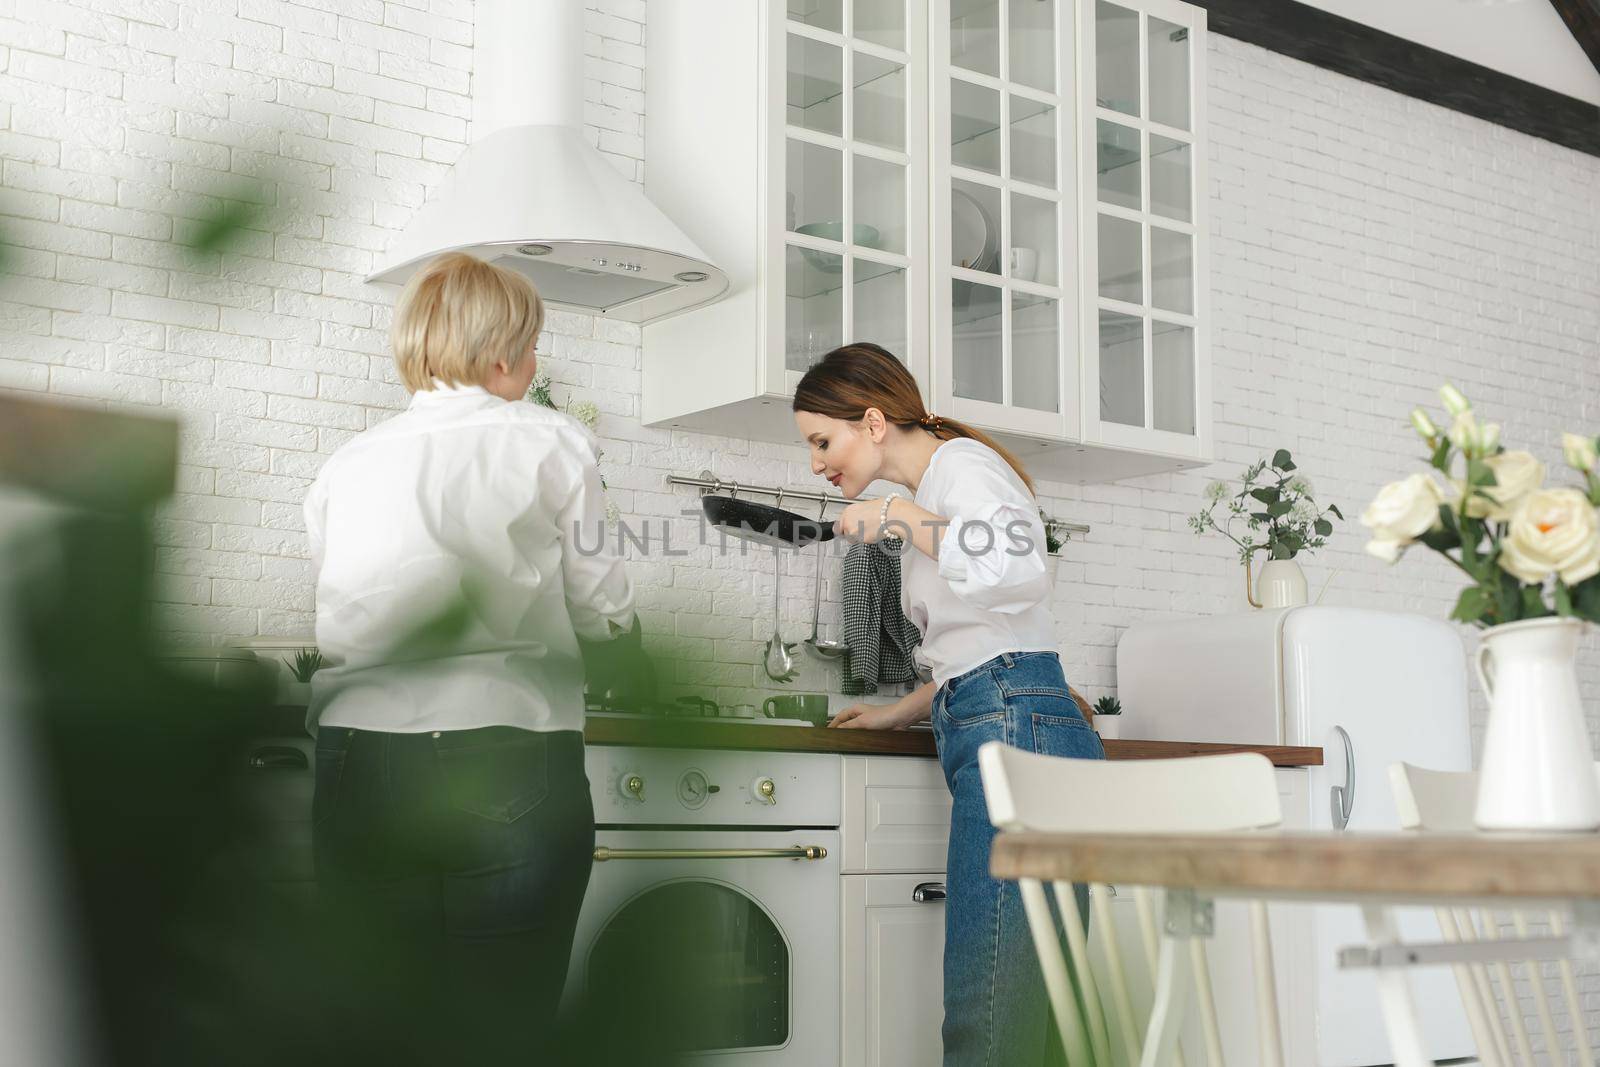 The older mother prepares food in the kitchen, the daughter drinks tea and looks at her mother by StudioPeace